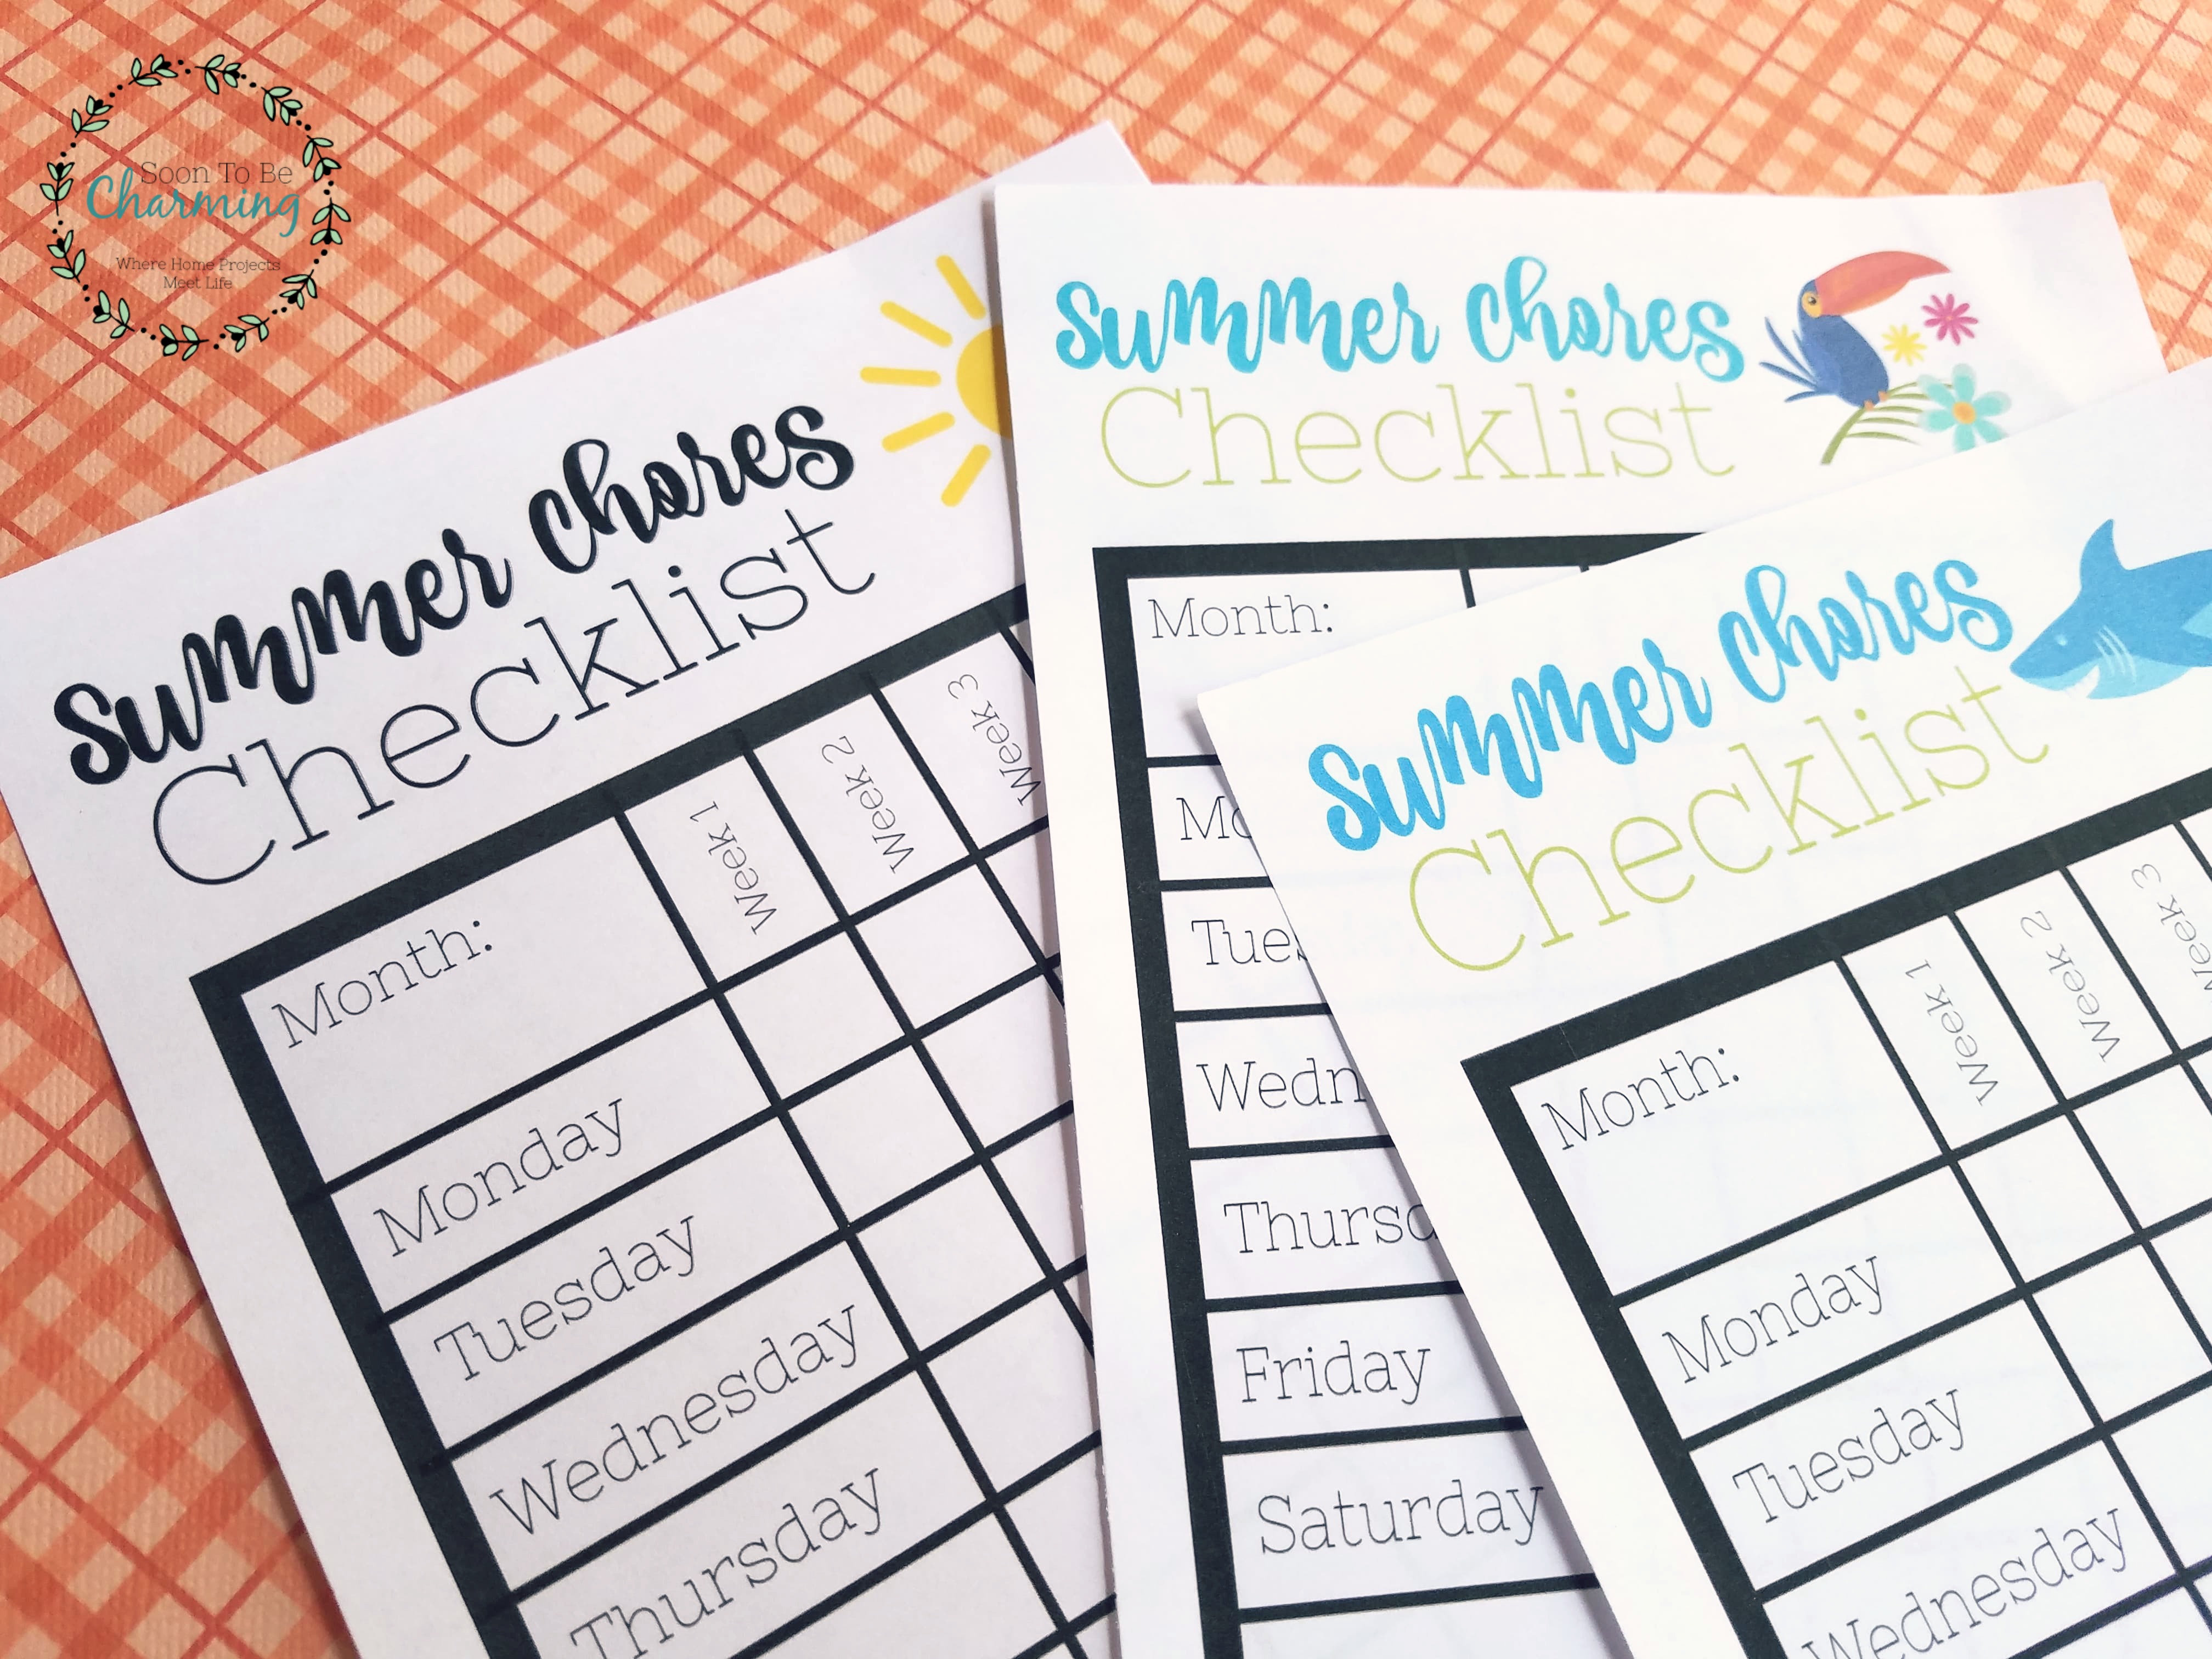 Summer Chores Checklist with Free Printable